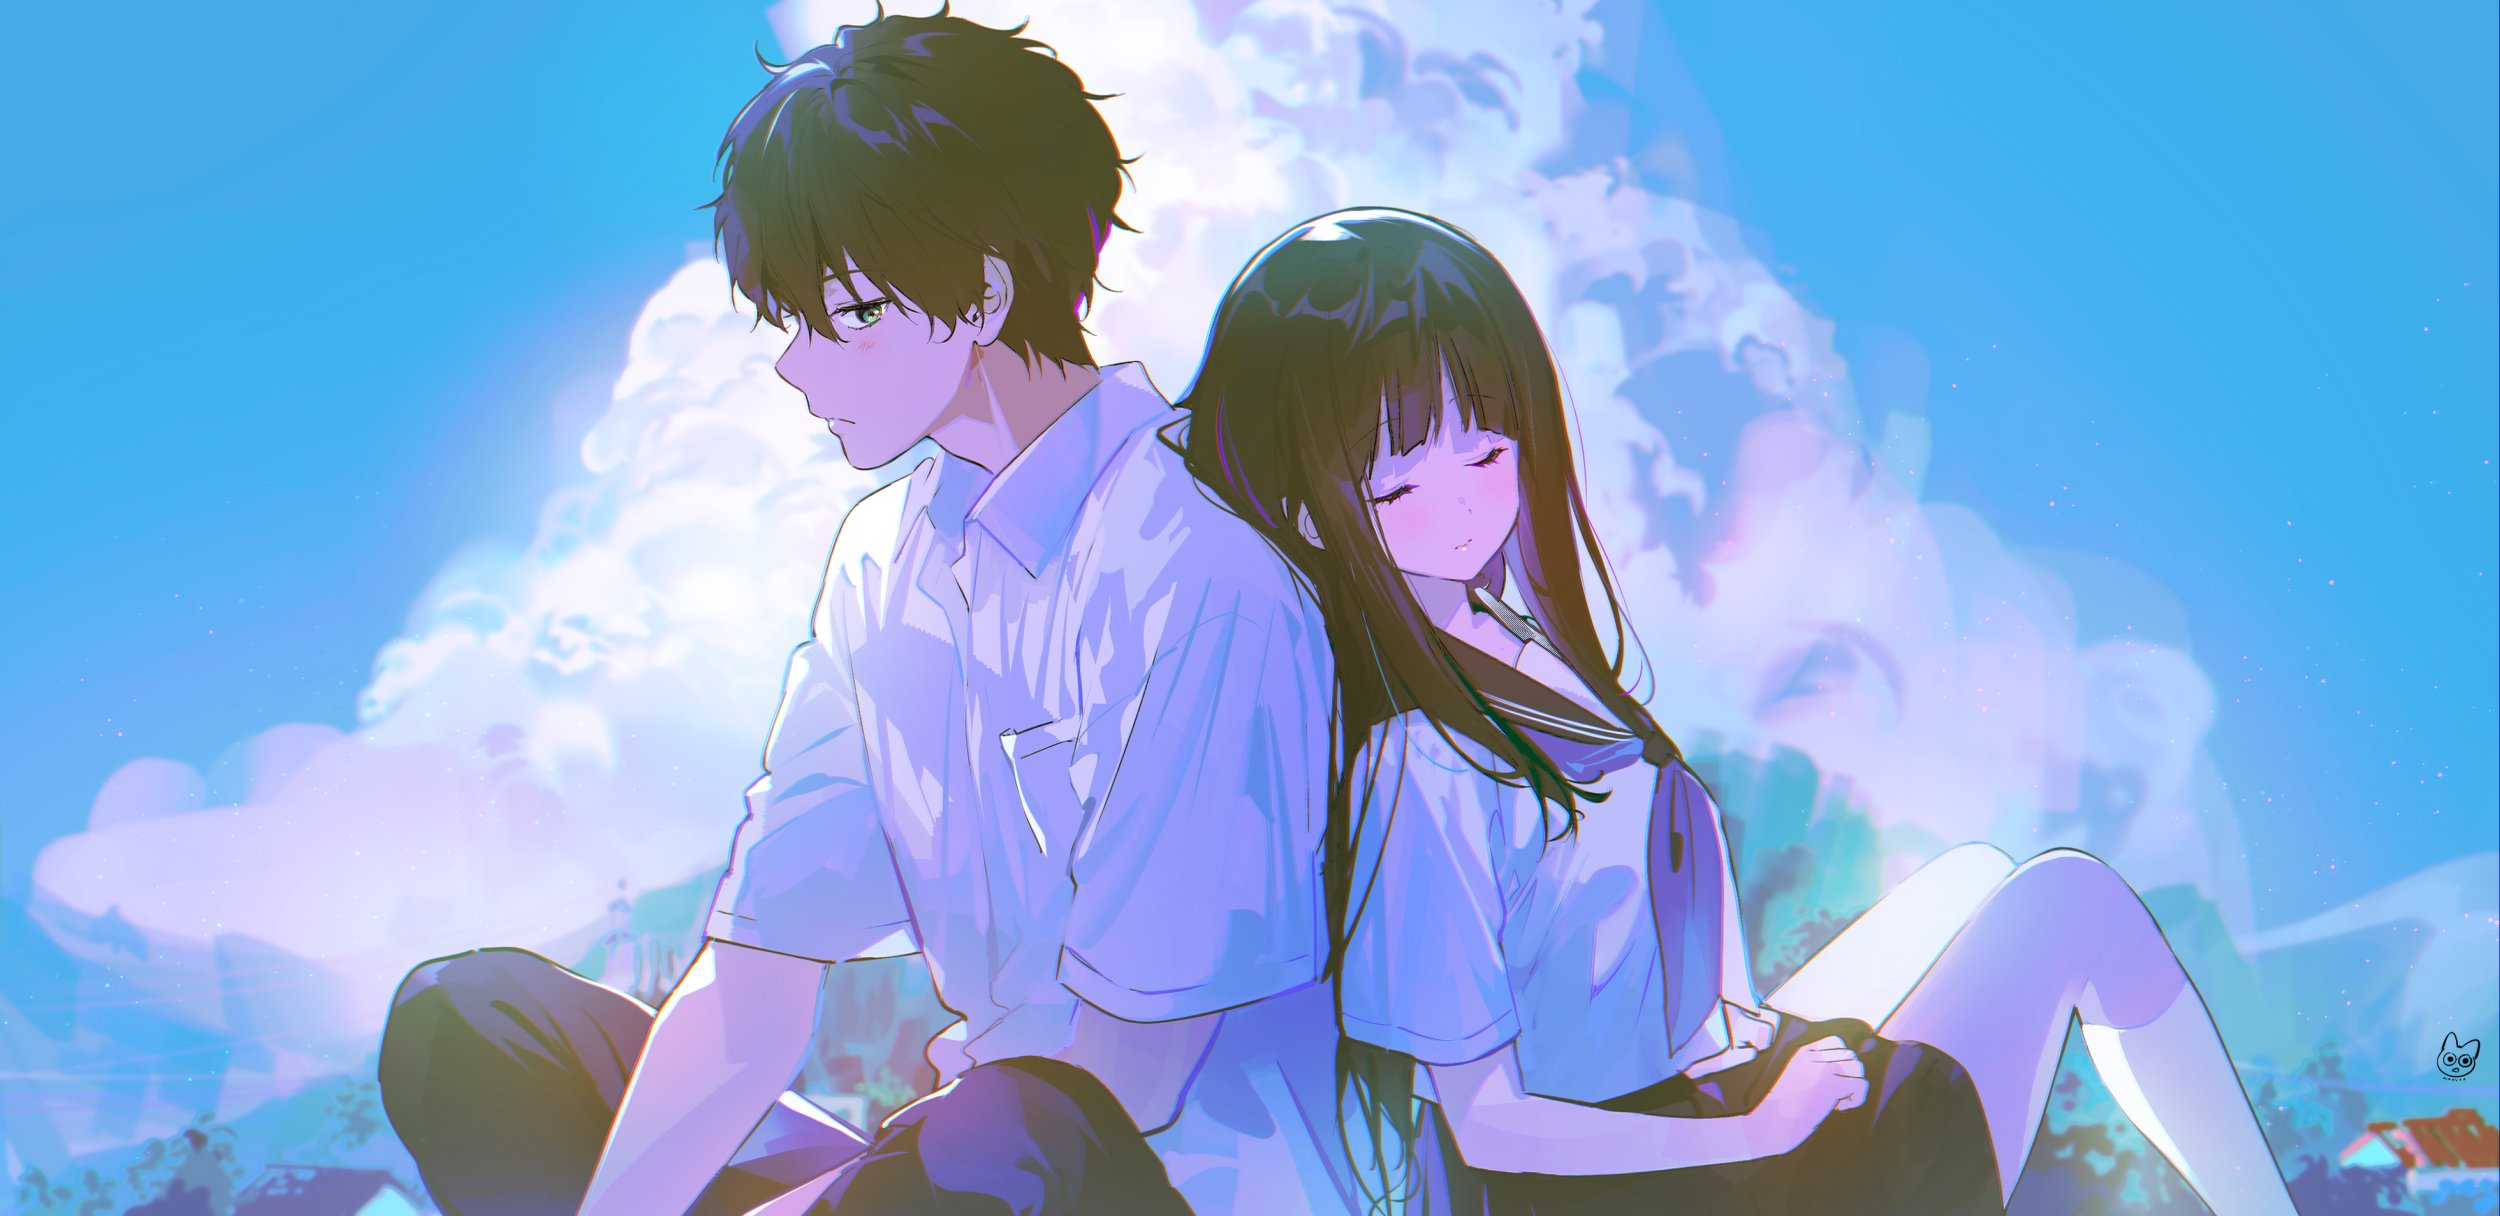 4538170 anime Hyouka  Rare Gallery HD Wallpapers